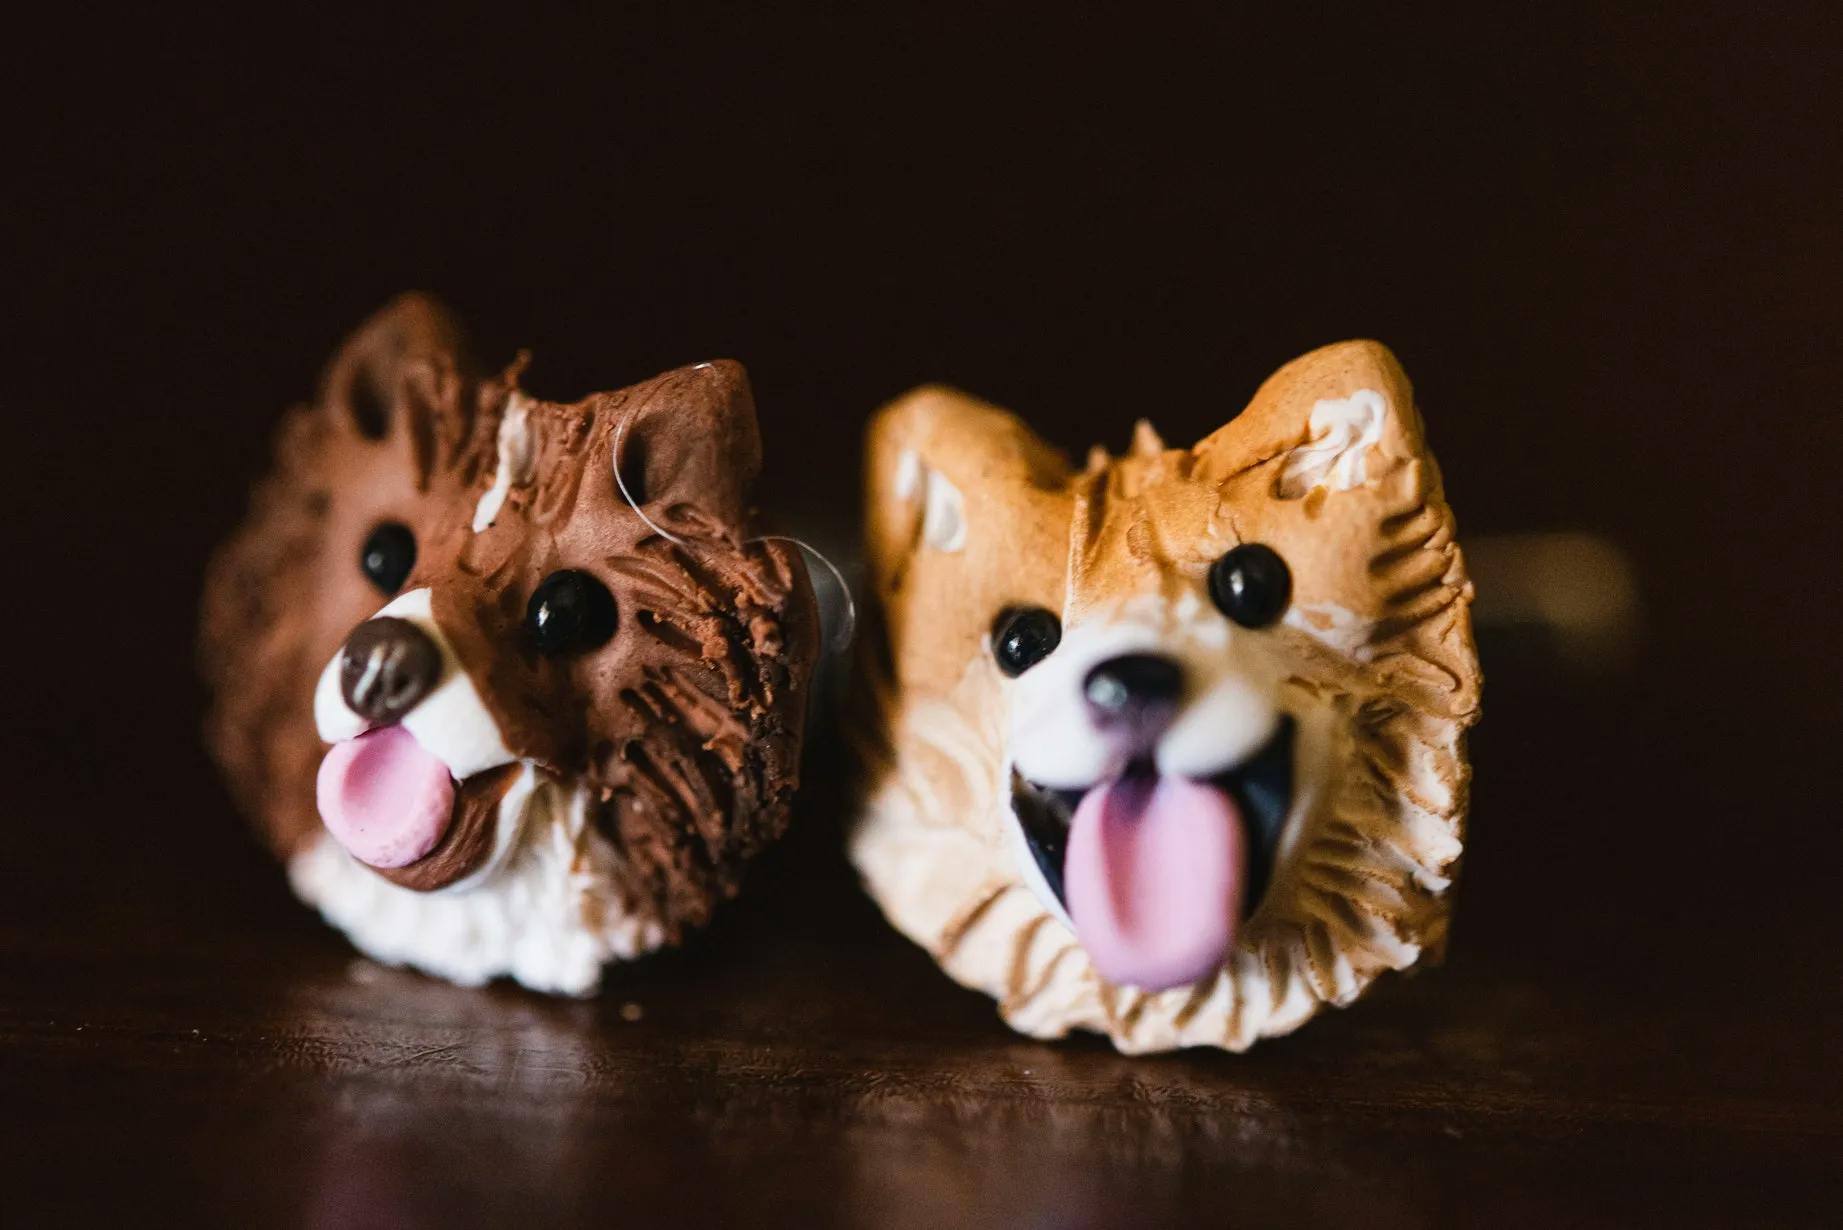 Two detailed dog face cufflinks sit side by side. The left one features a fluffy brown dog with a pink tongue out, while the right one resembles a tan and white dog with a wide smile and tongue out. Both have black button eyes, capturing a playful expression.